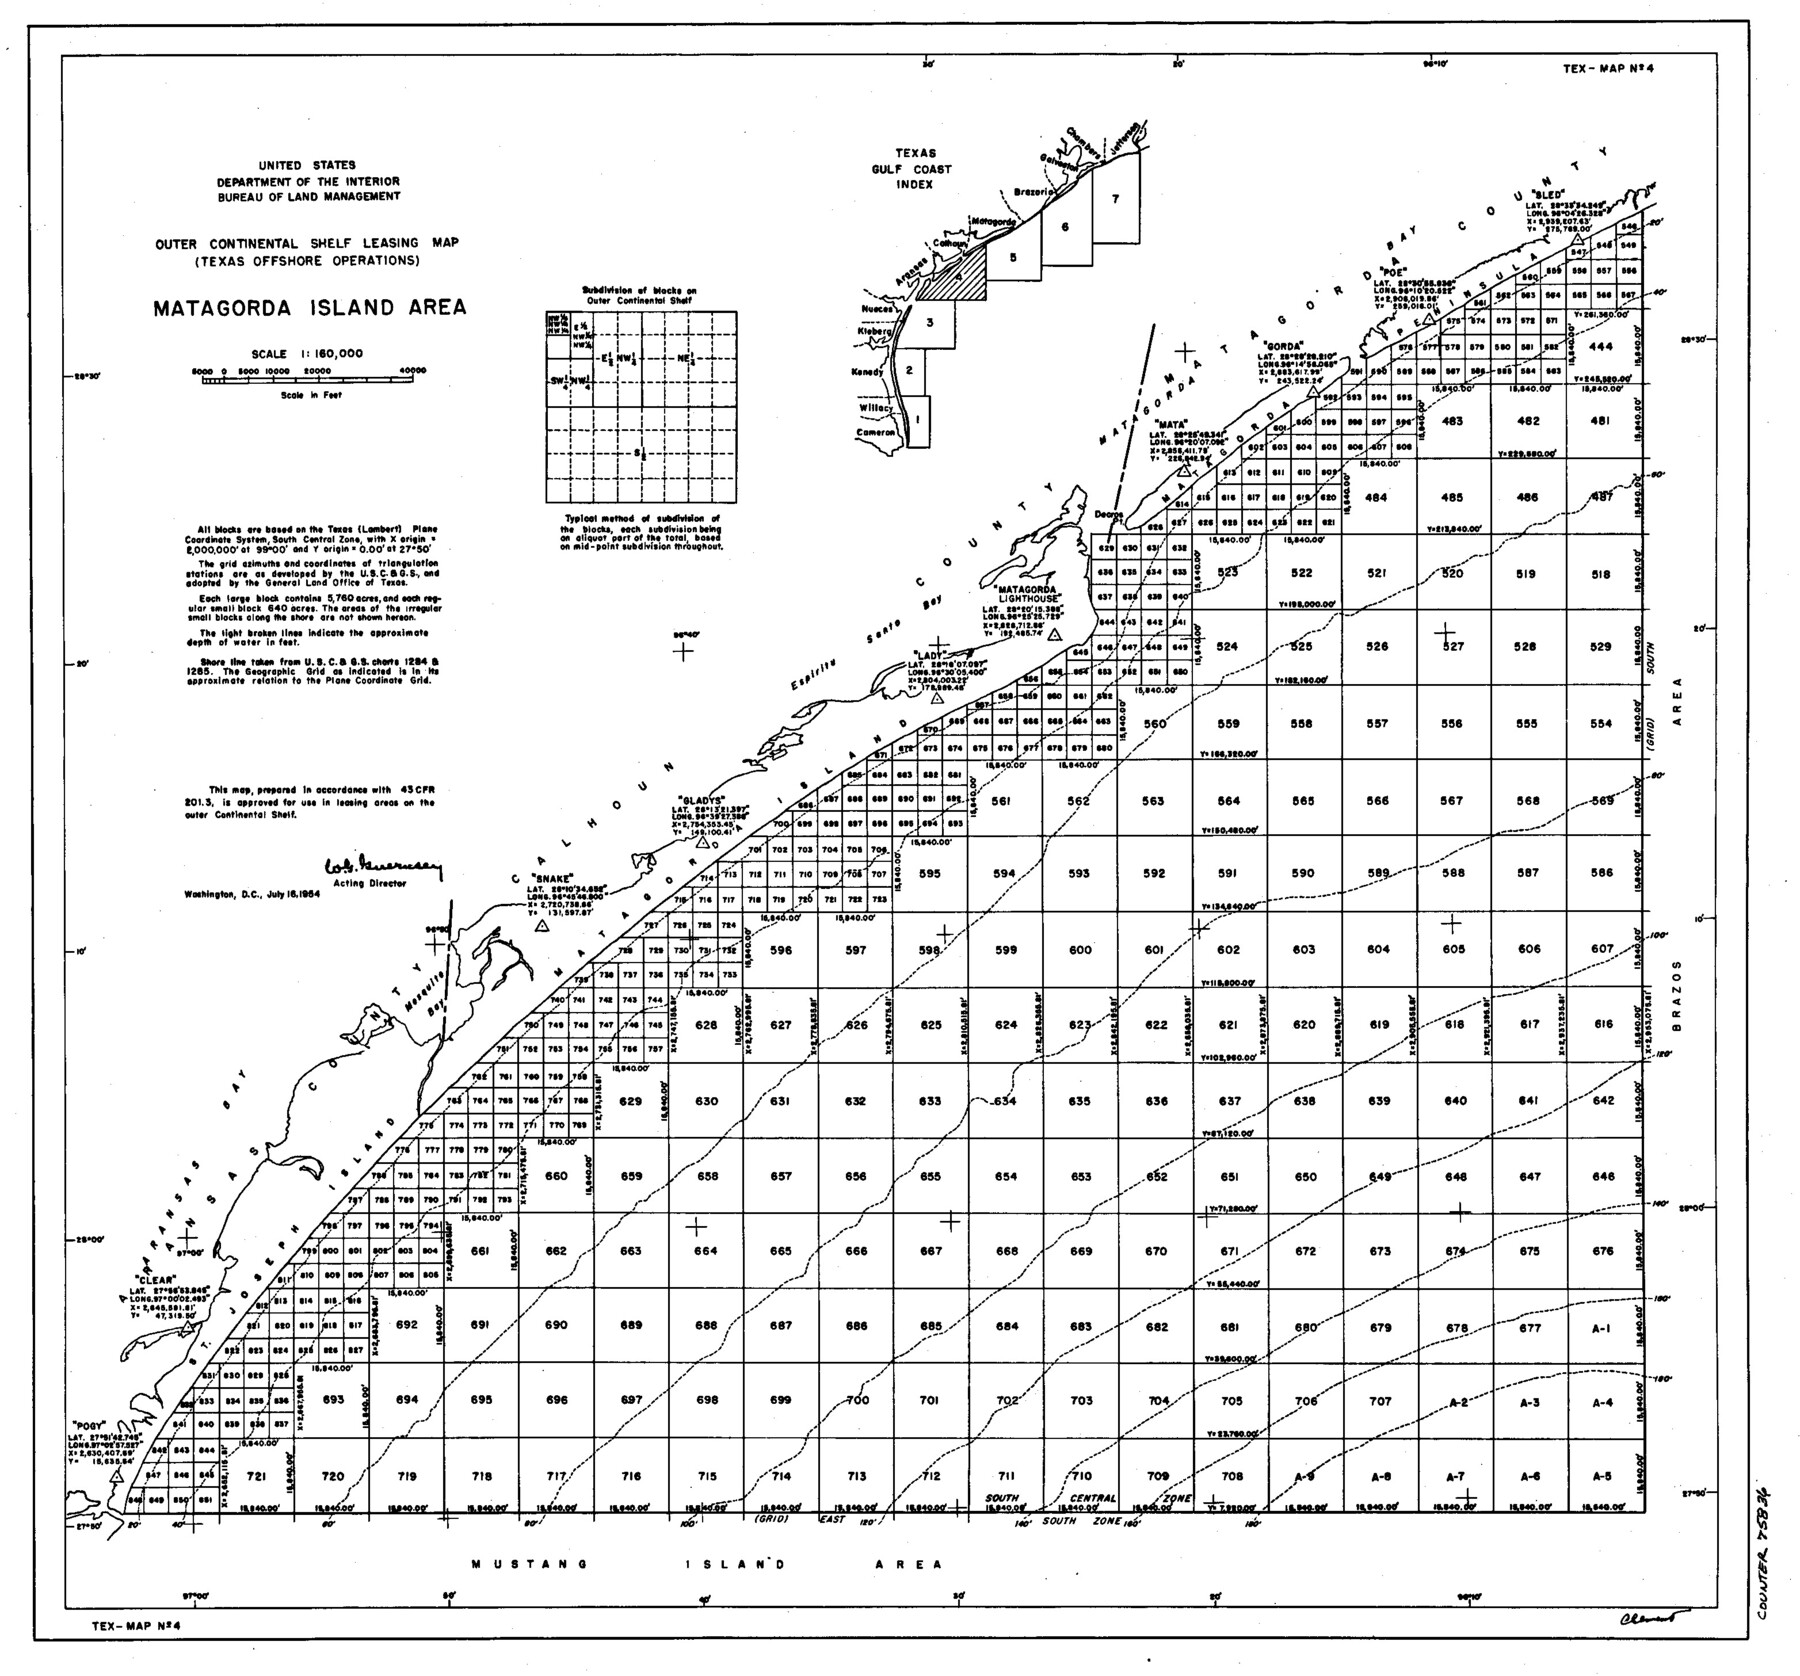 75836, Outer Continental Shelf Leasing Maps (Texas Offshore Operations), General Map Collection